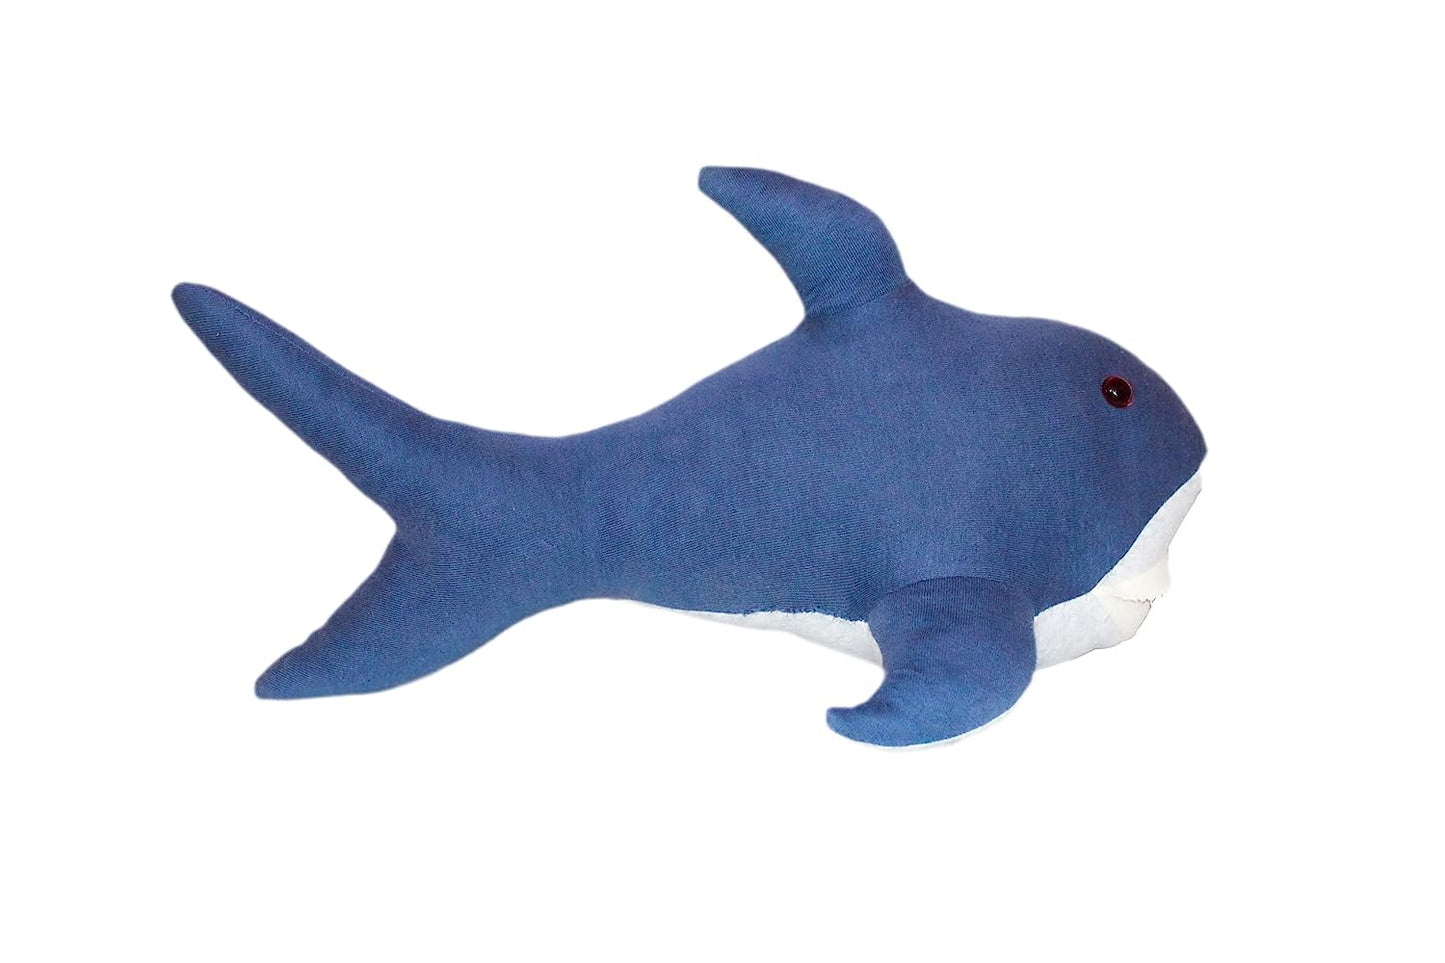 16 inches Shark Plush Soft Toys for Kids (Blue)